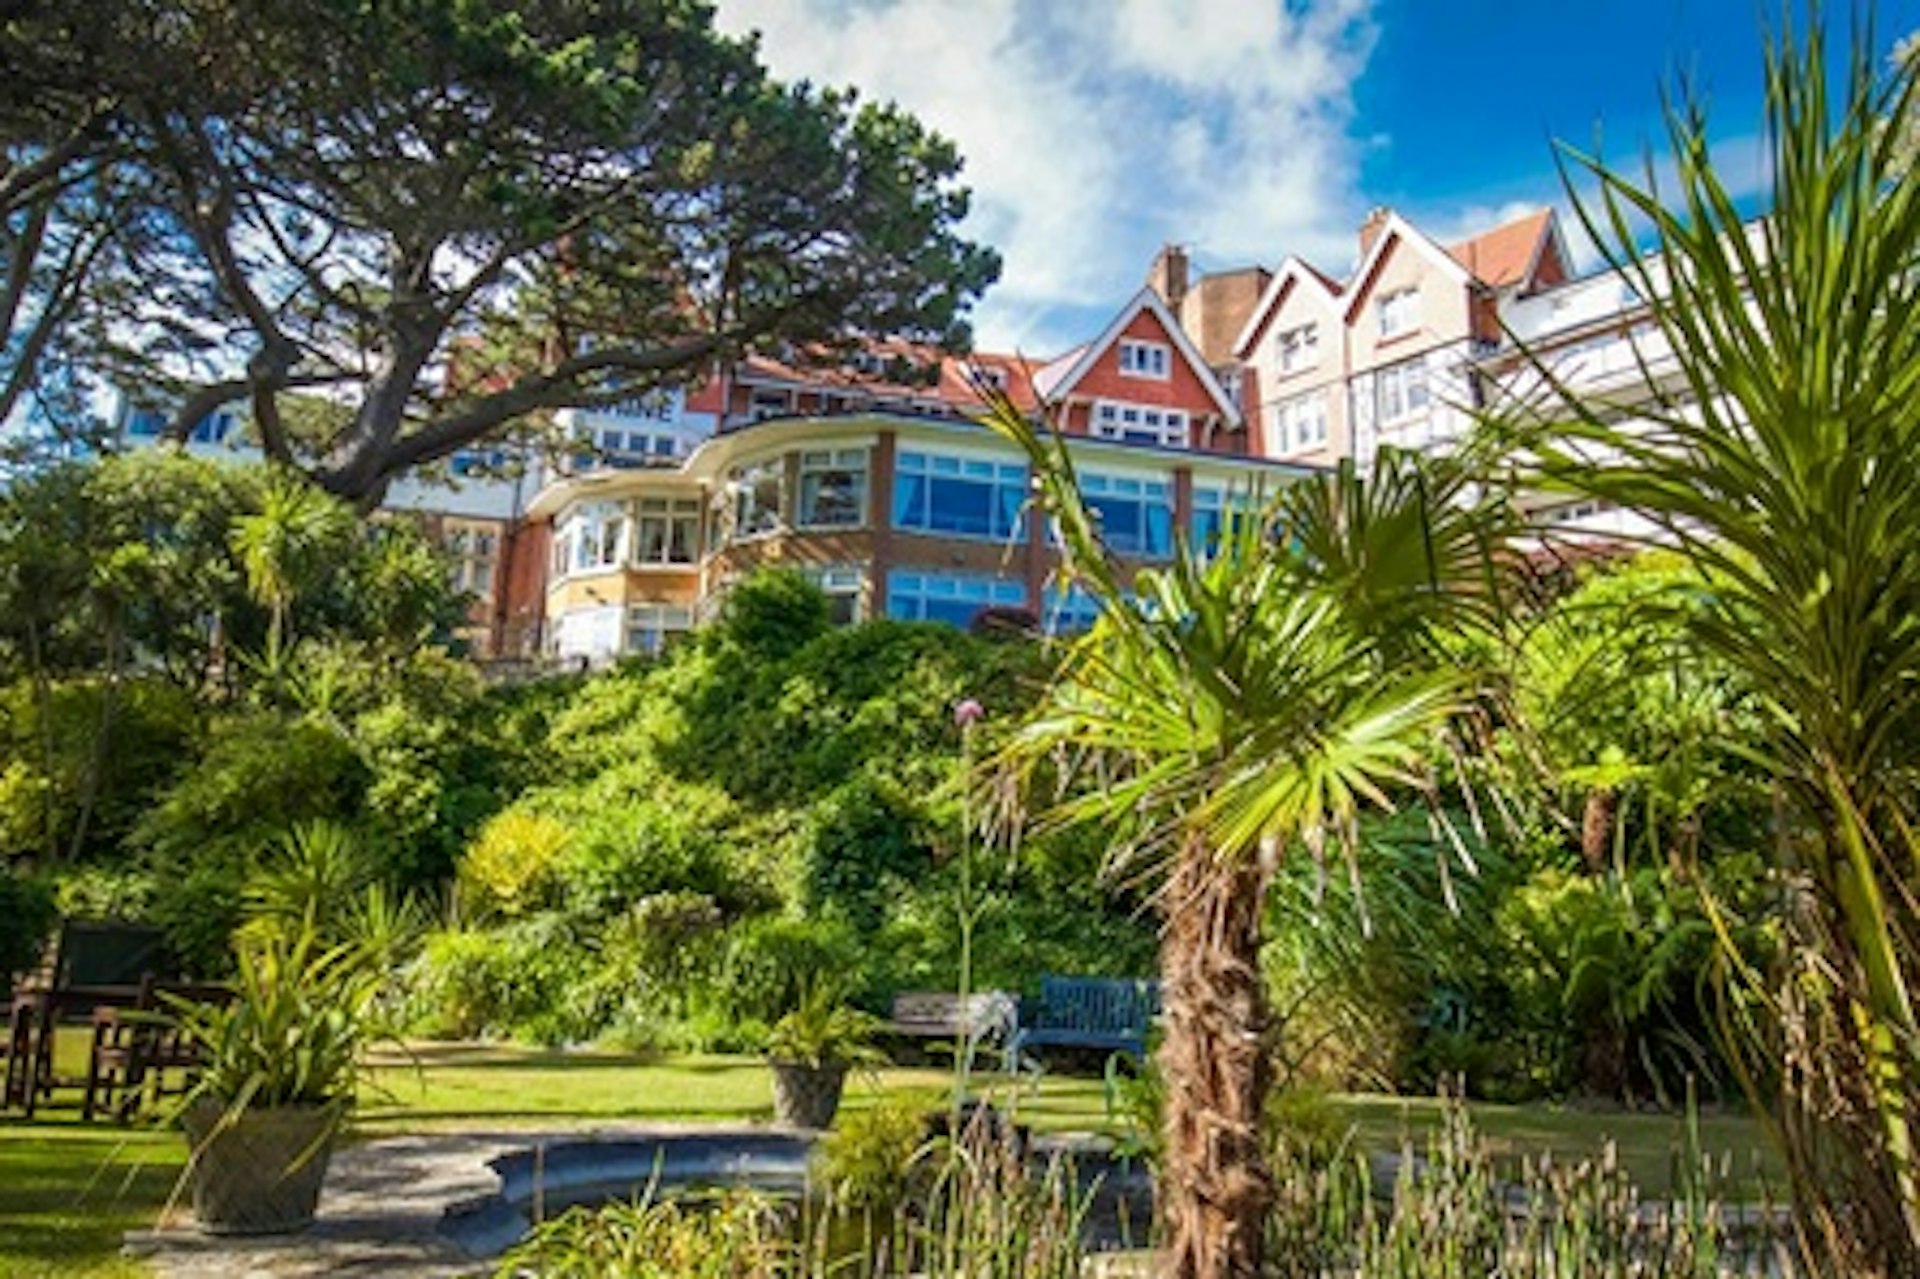 Two Night Coastal Escape for Two at The Chine Hotel, Bournemouth 2